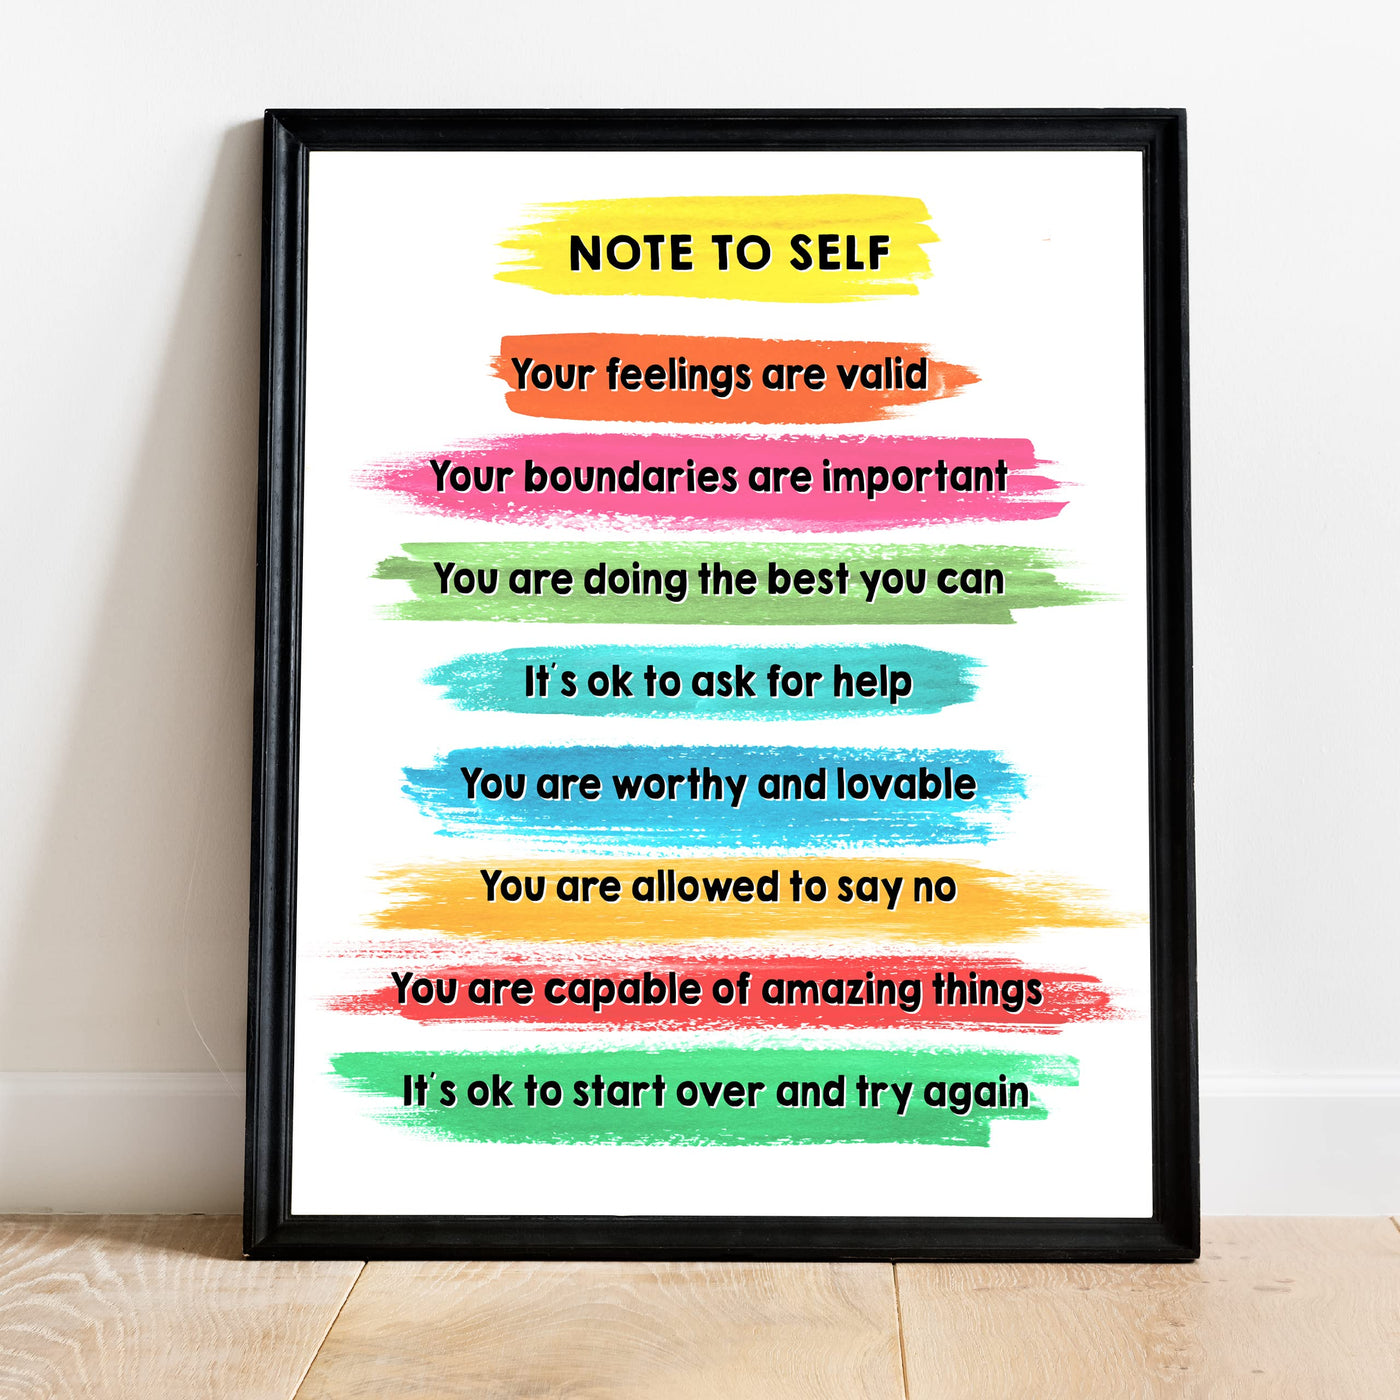 Note to Self -You Are Worthy Inspirational Quotes Wall Art -11 x 14" Paint Brush Stroke Print -Ready to Frame. Motivational Affirmations for Home-Office-Classroom Decor. Great Gift of Inspiration!